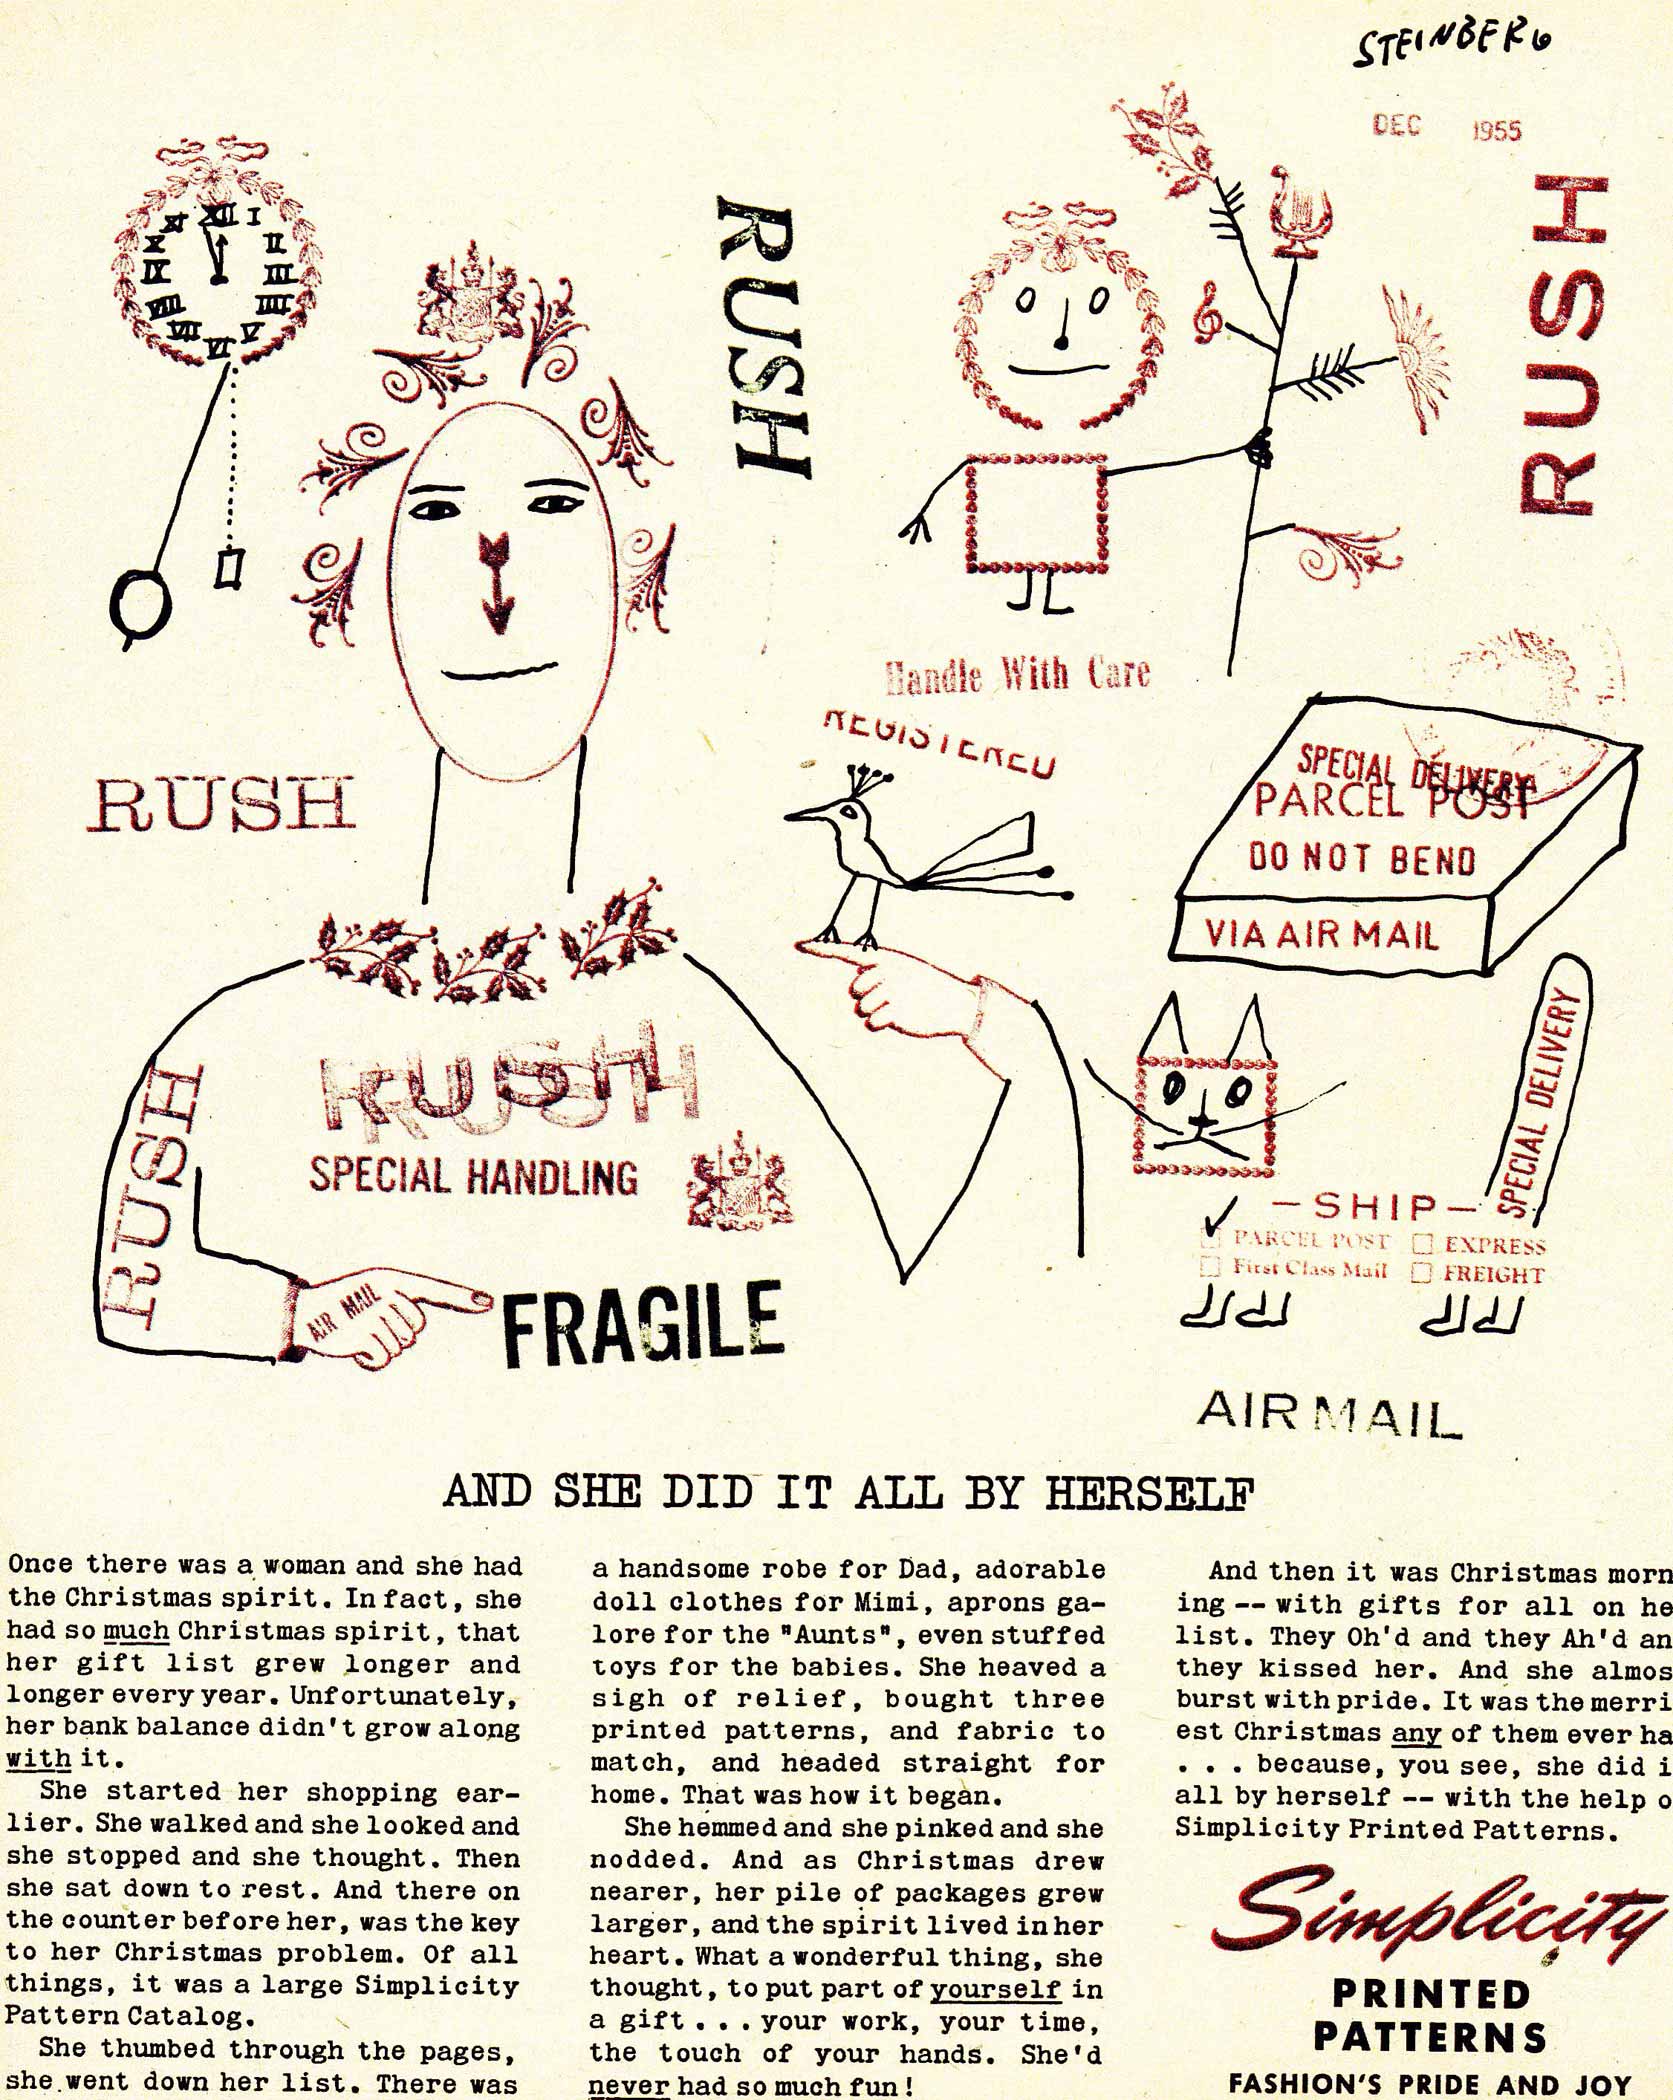 Advertisement for Simplicity Patterns, published in <em>The New York Times Magazine</em>, November 6, 1955.